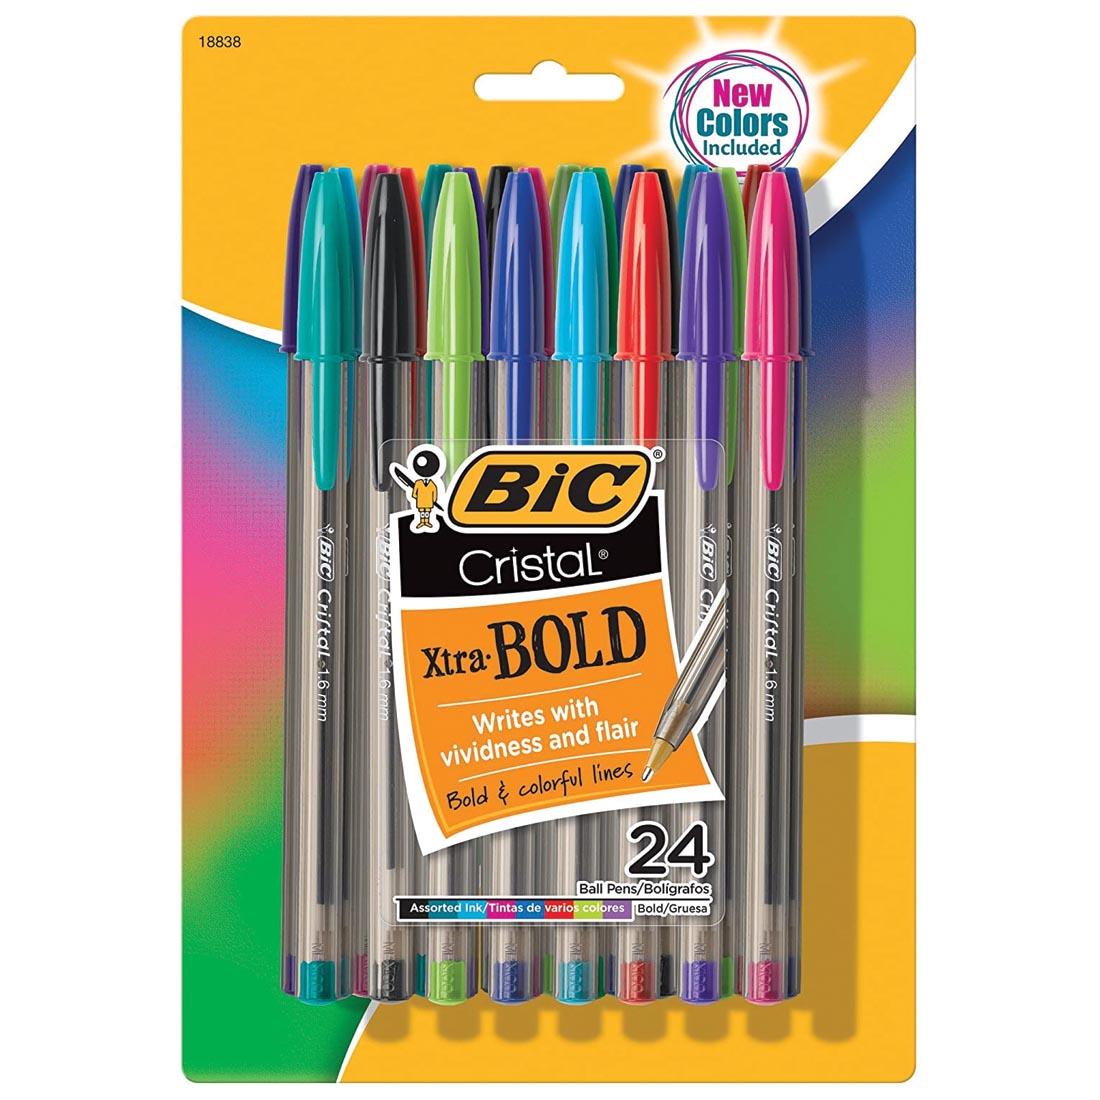 BiC Cristal Xtra Bold Pens 24-Count Package